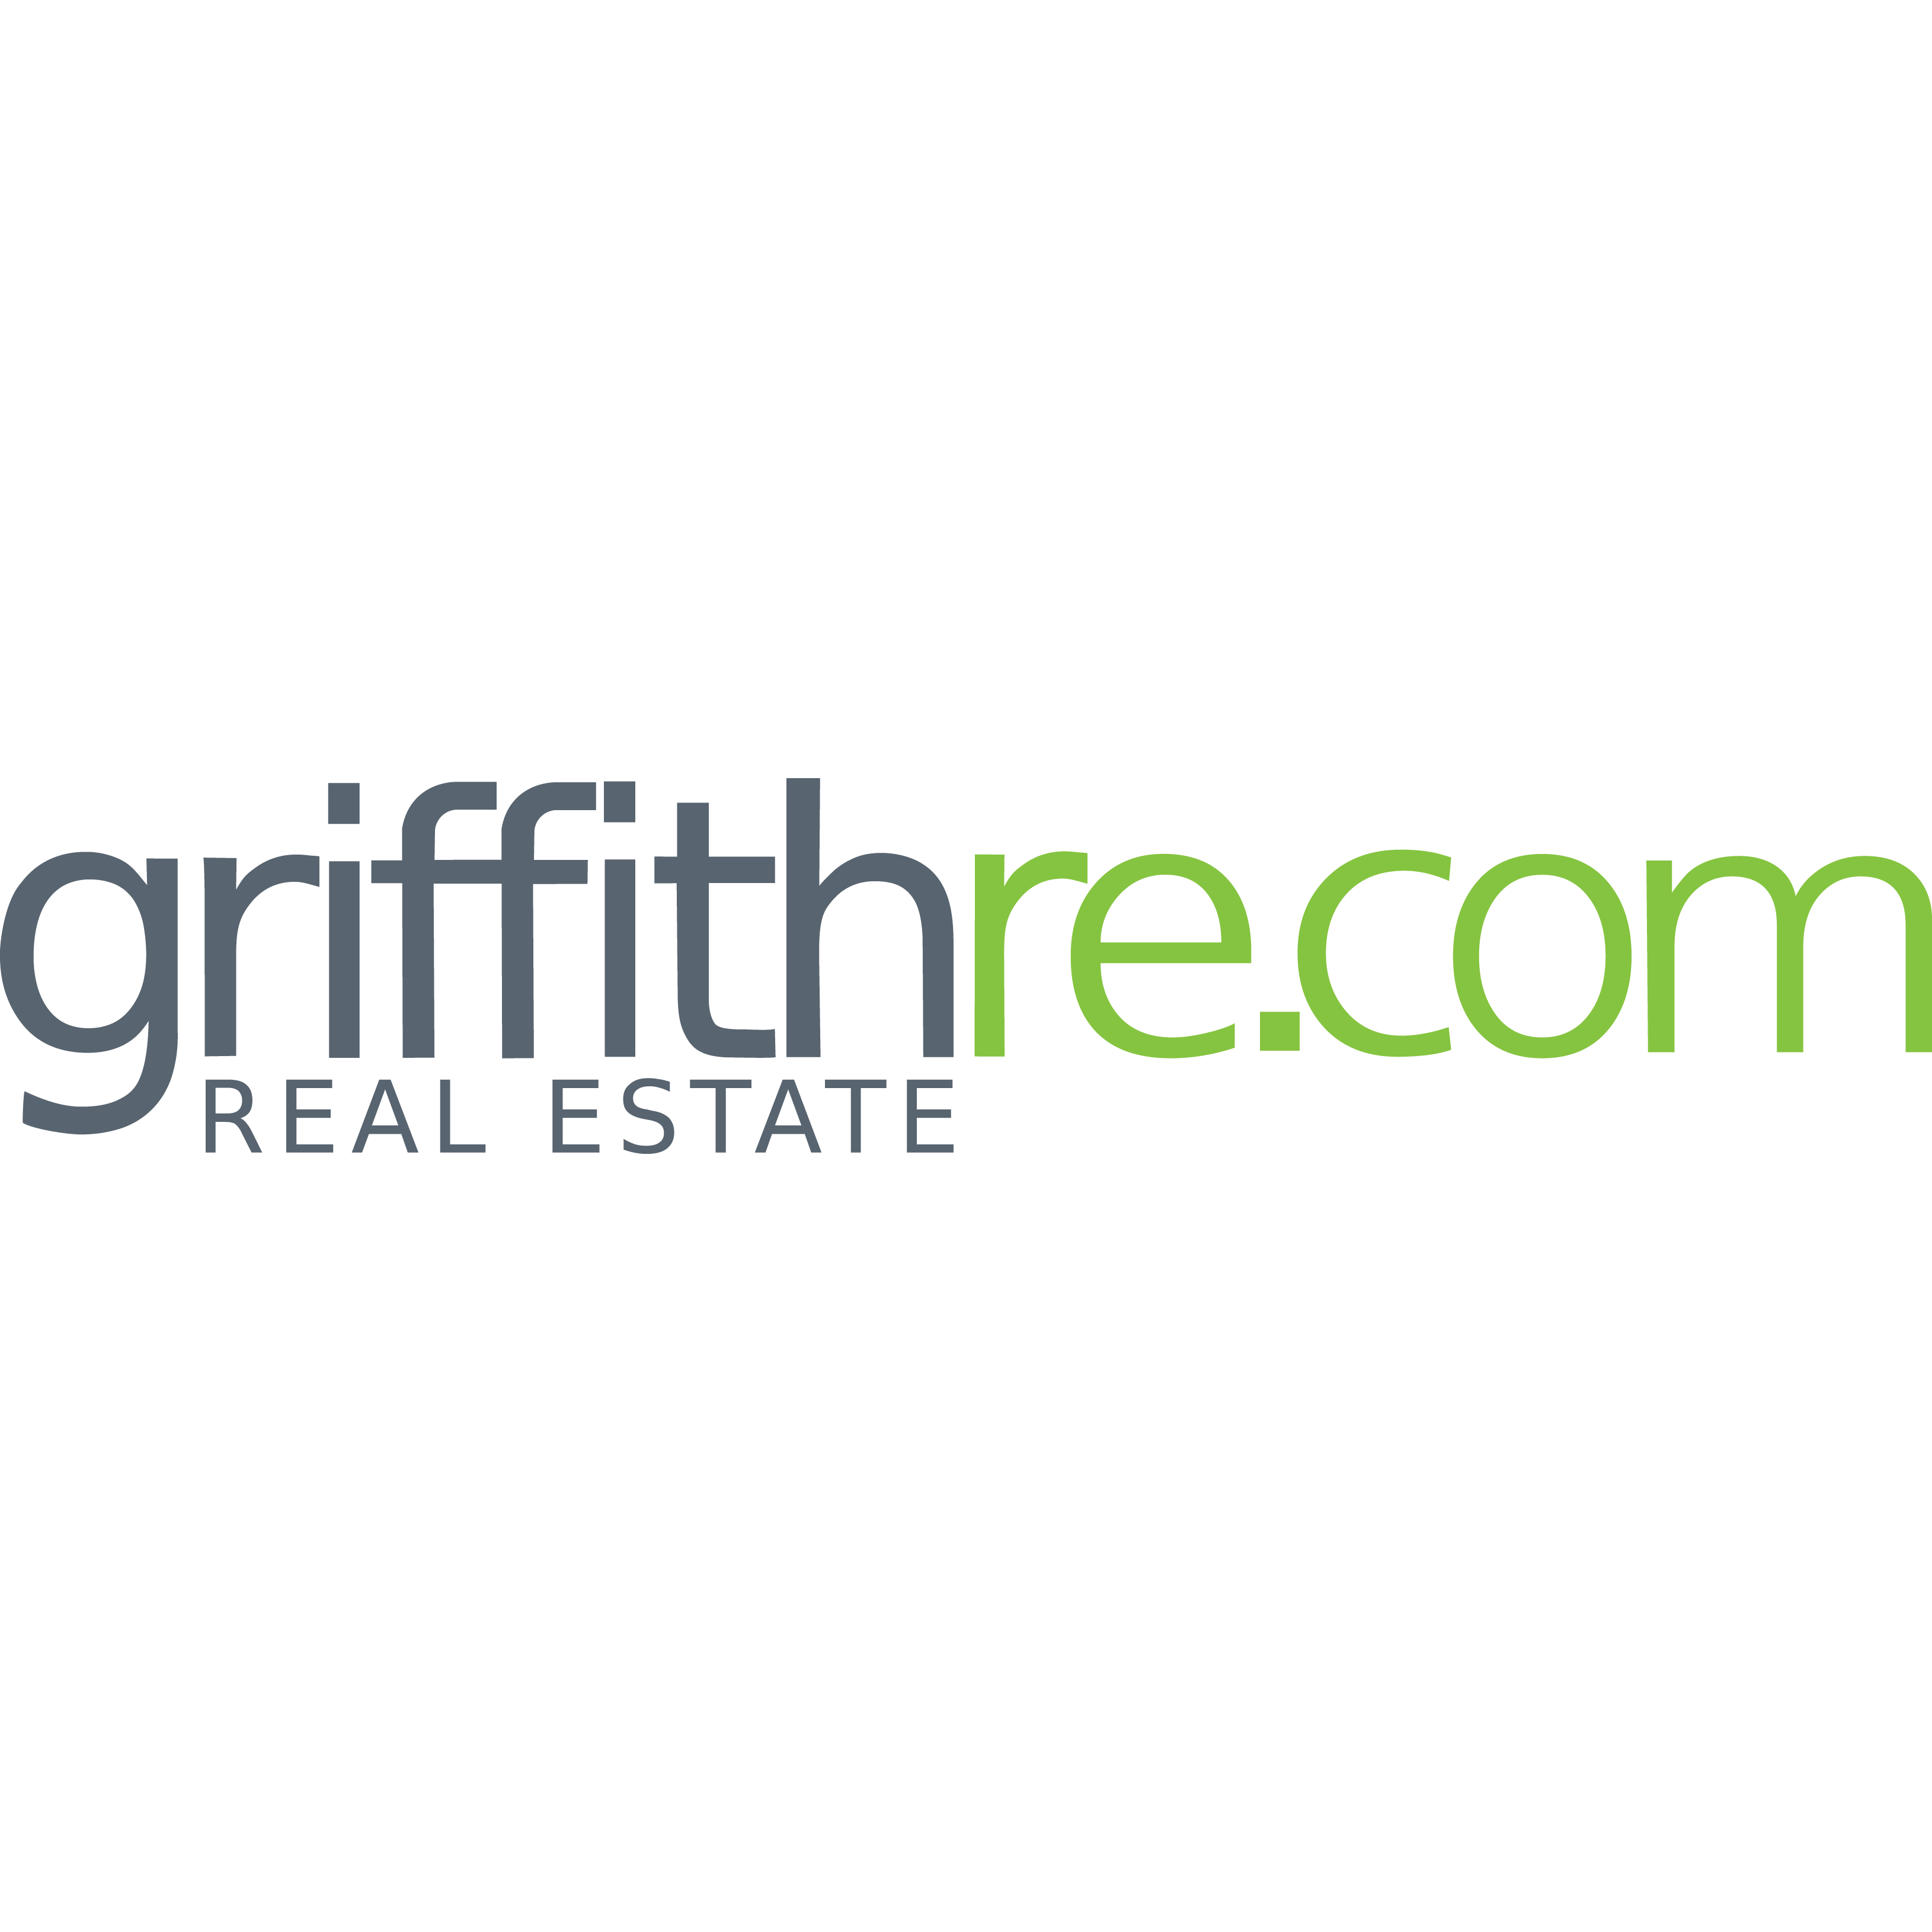 Griffith Real Estate Logo